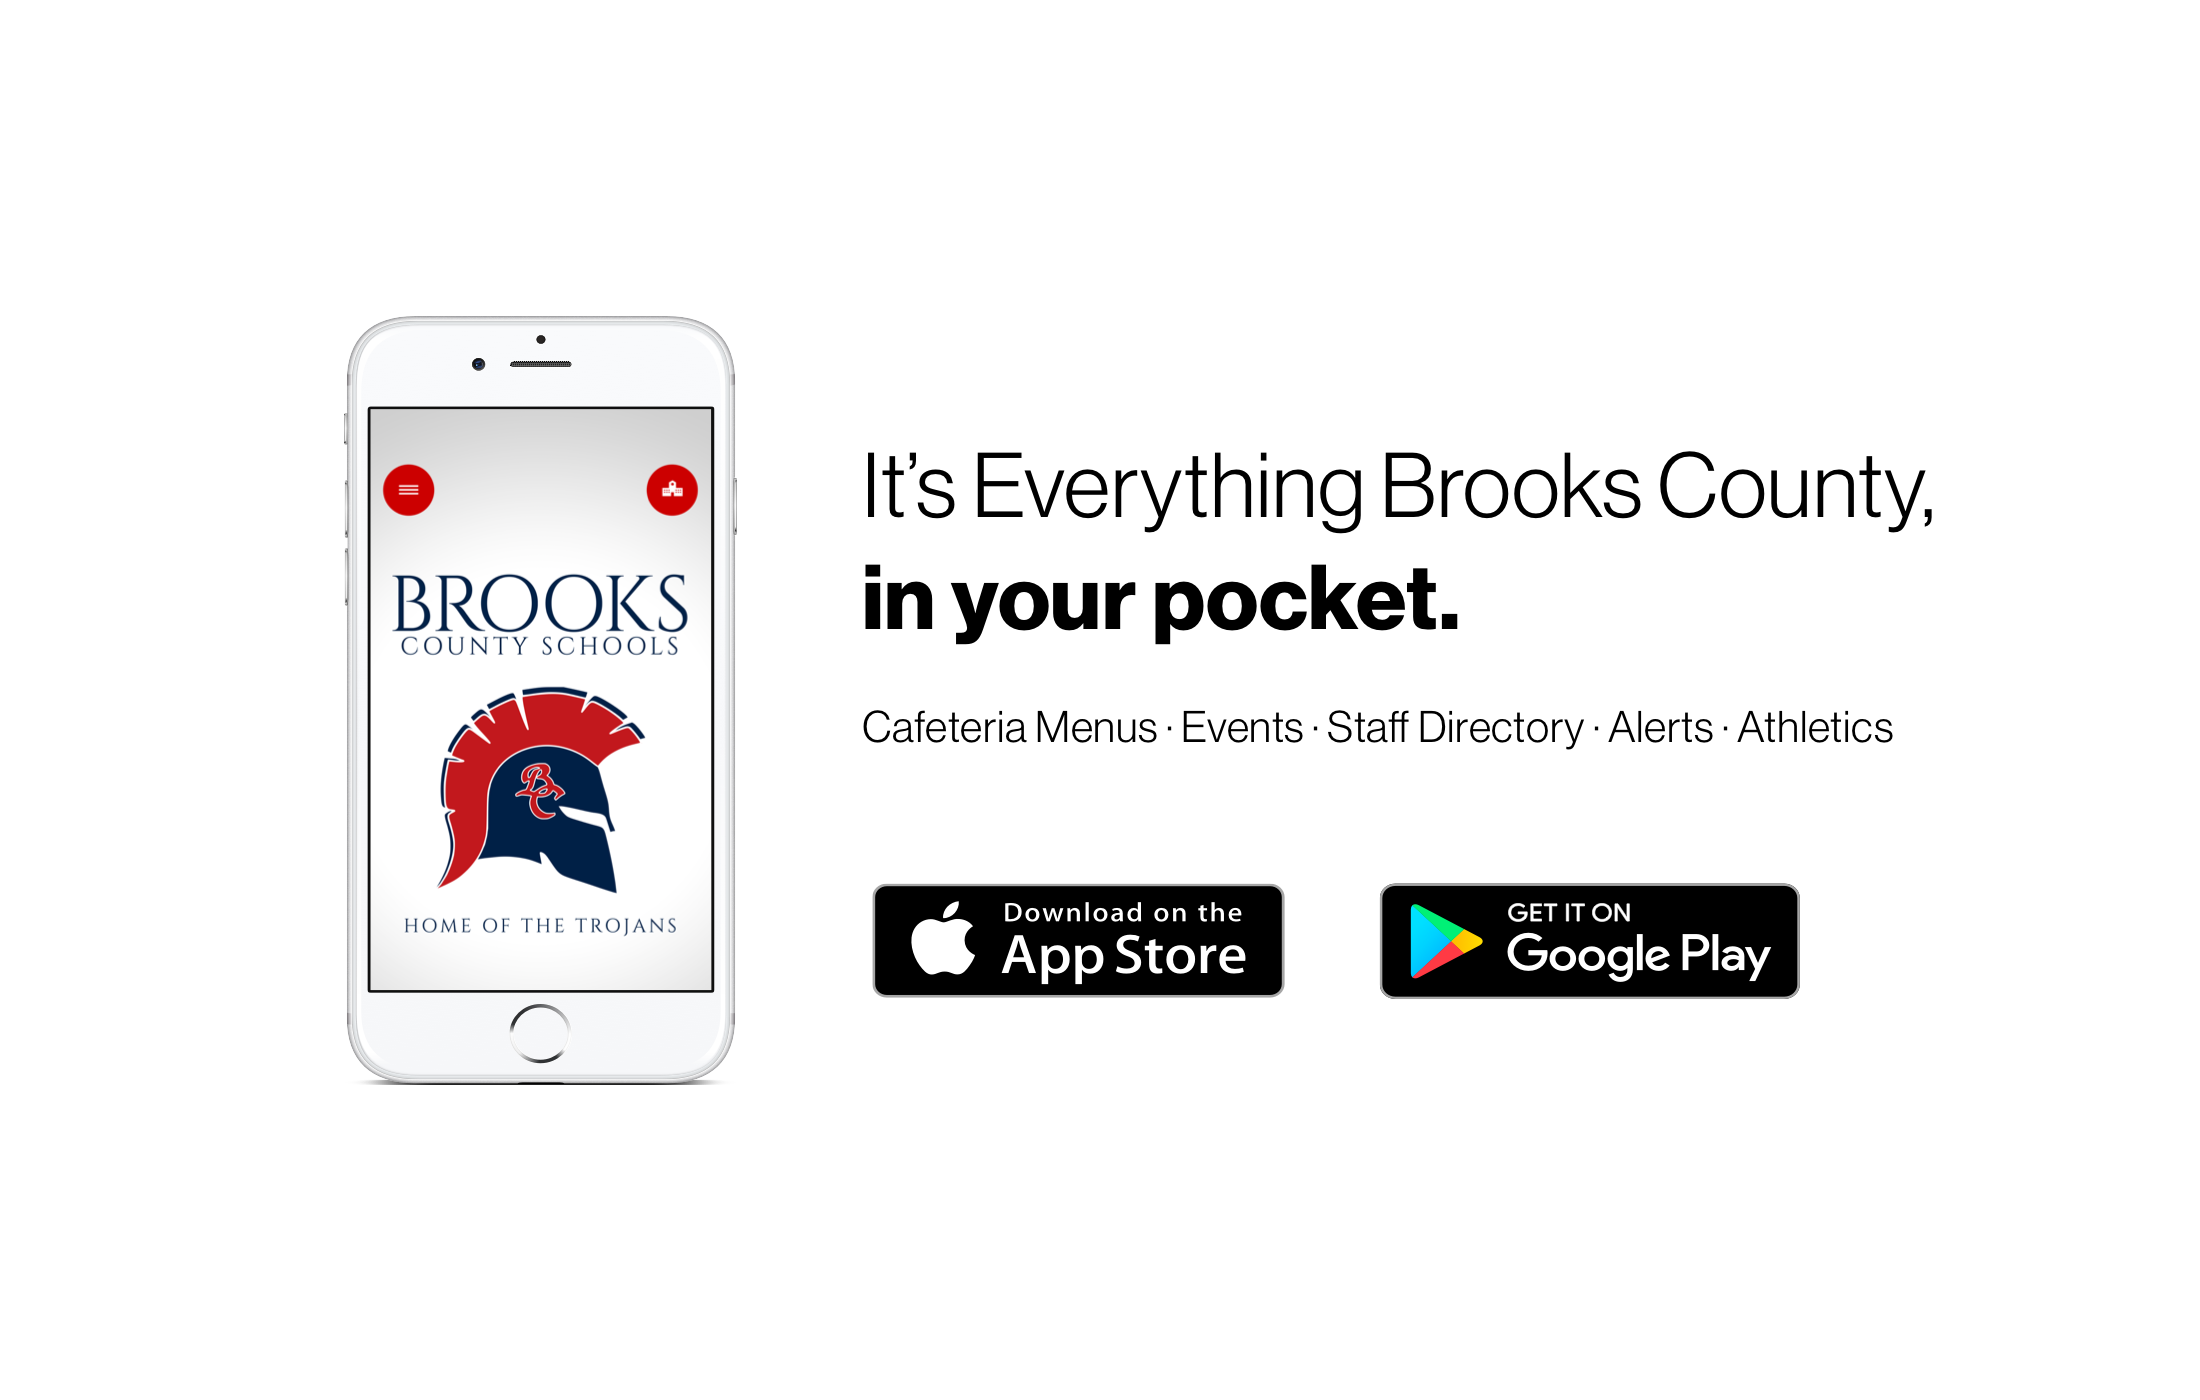 It's everything Brooks County in your pocket